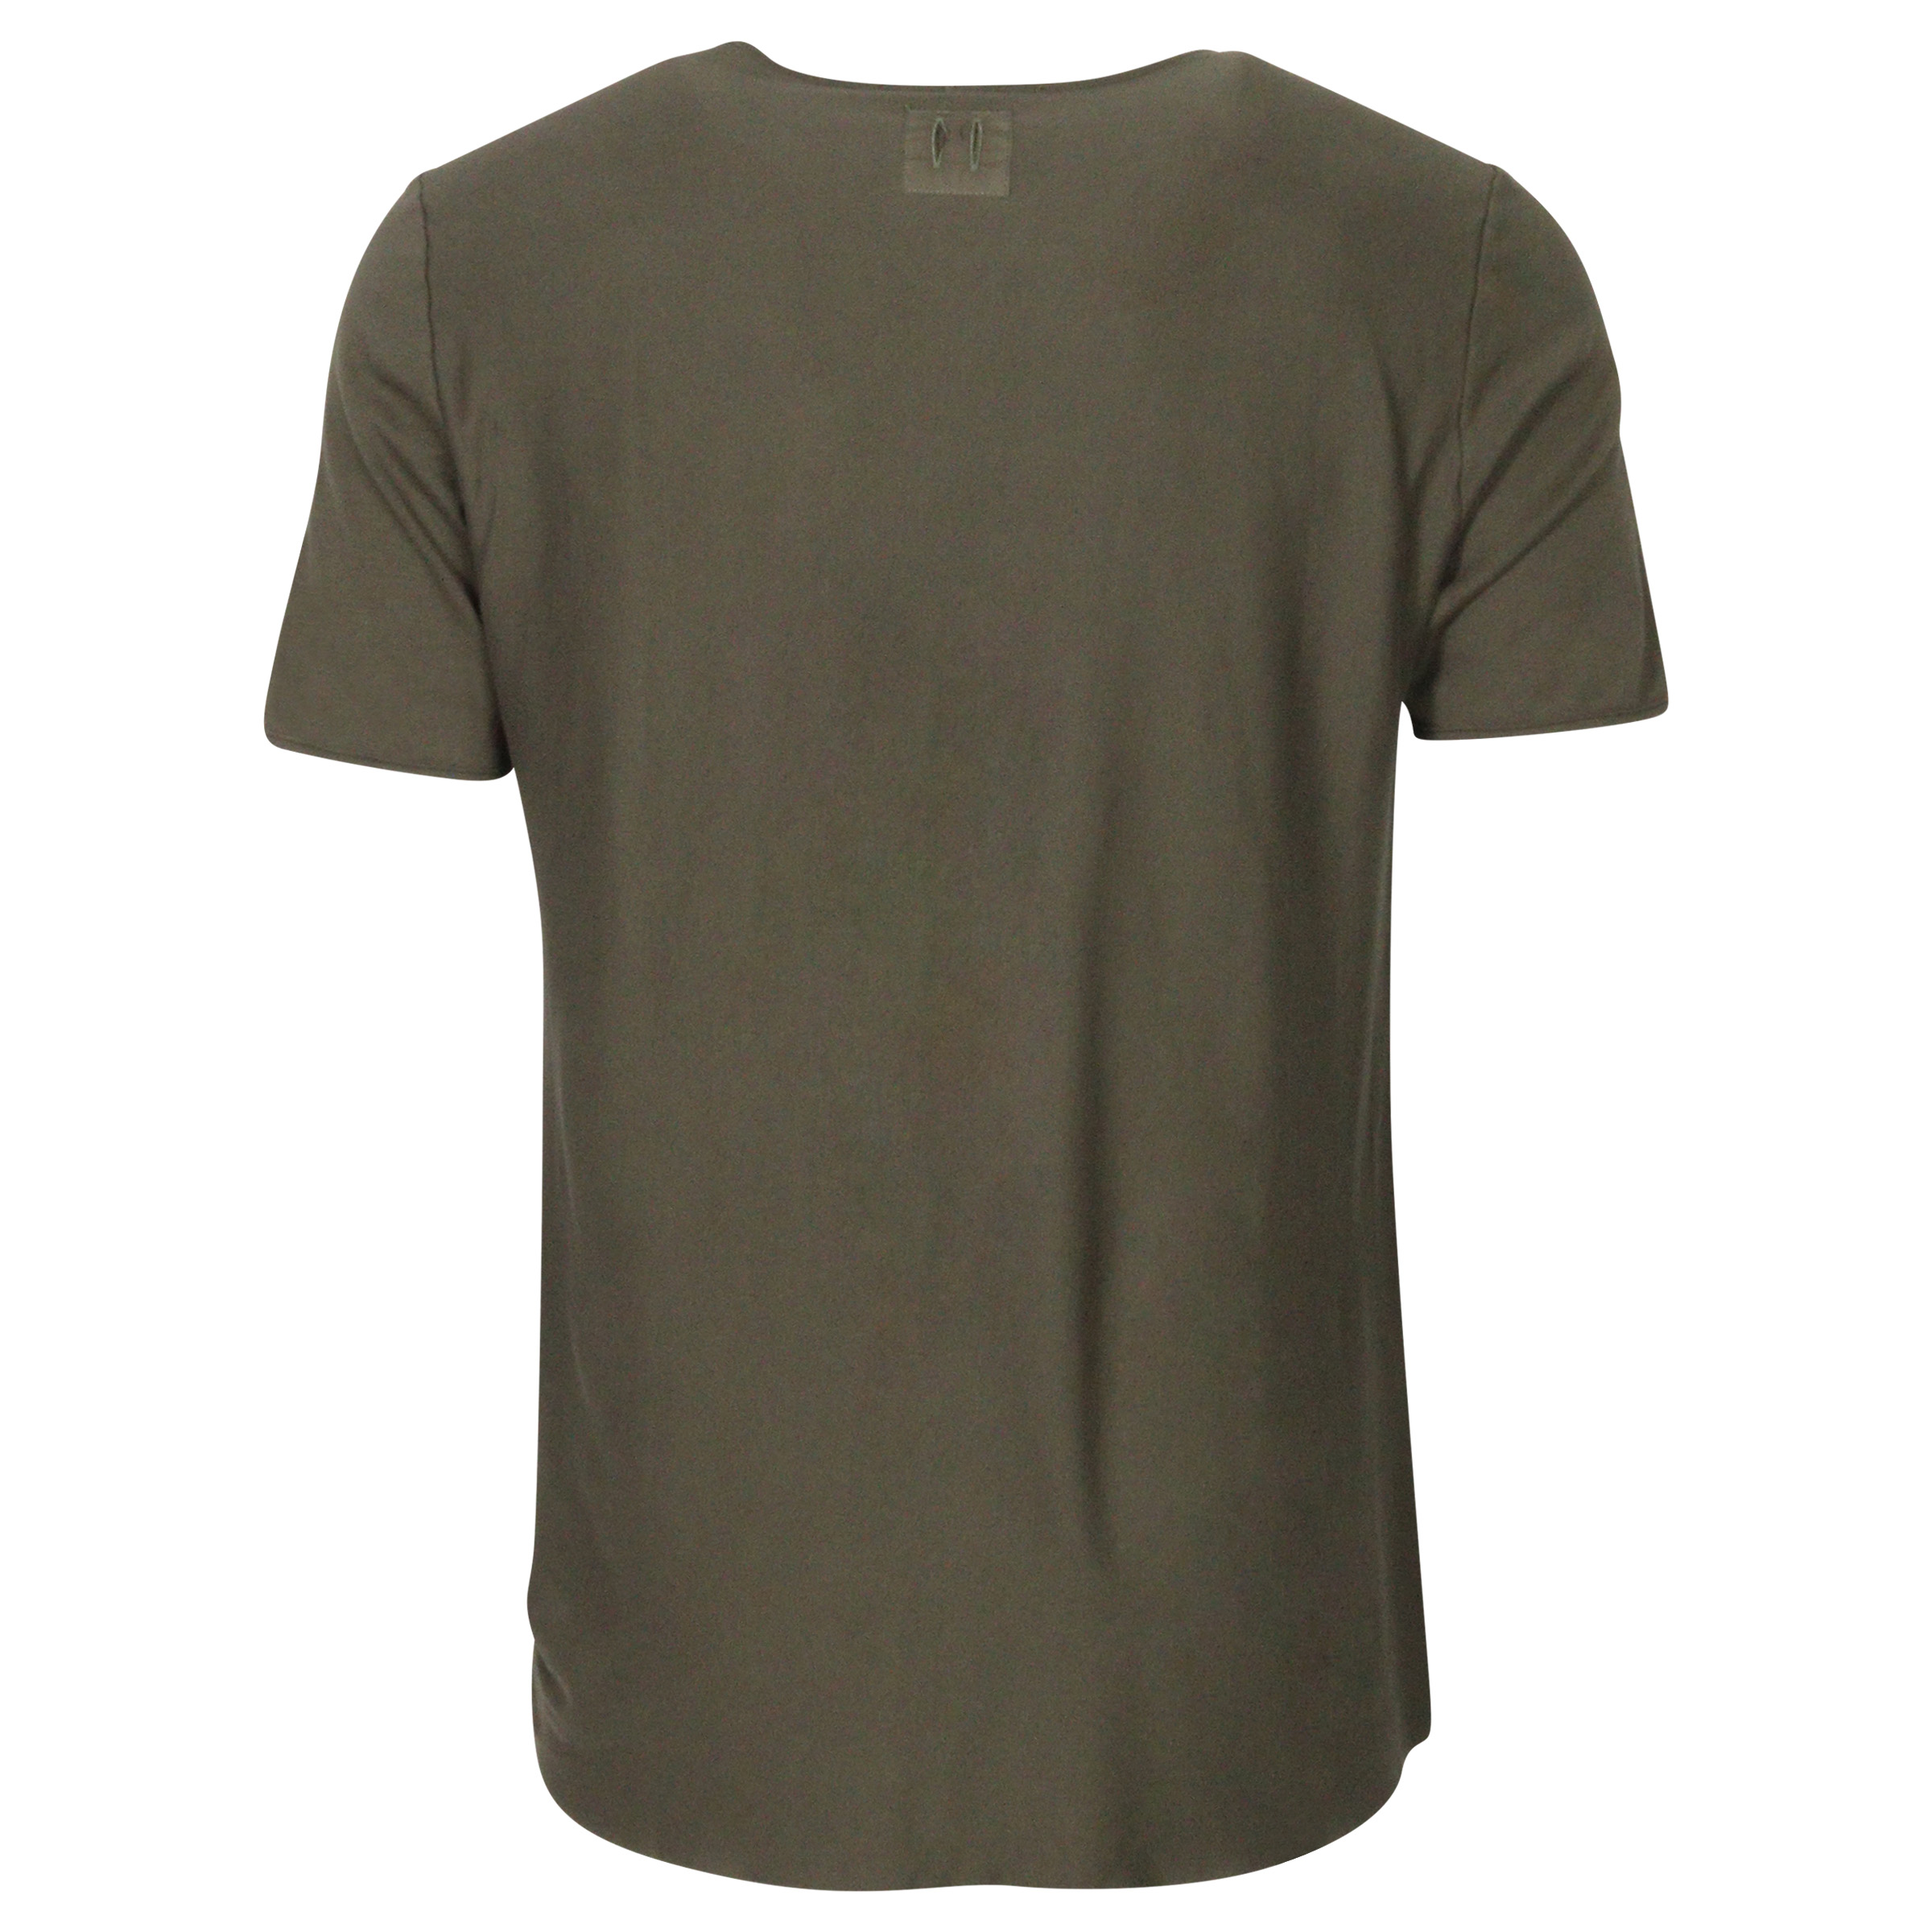 Hannes Roether T-Shirt Green